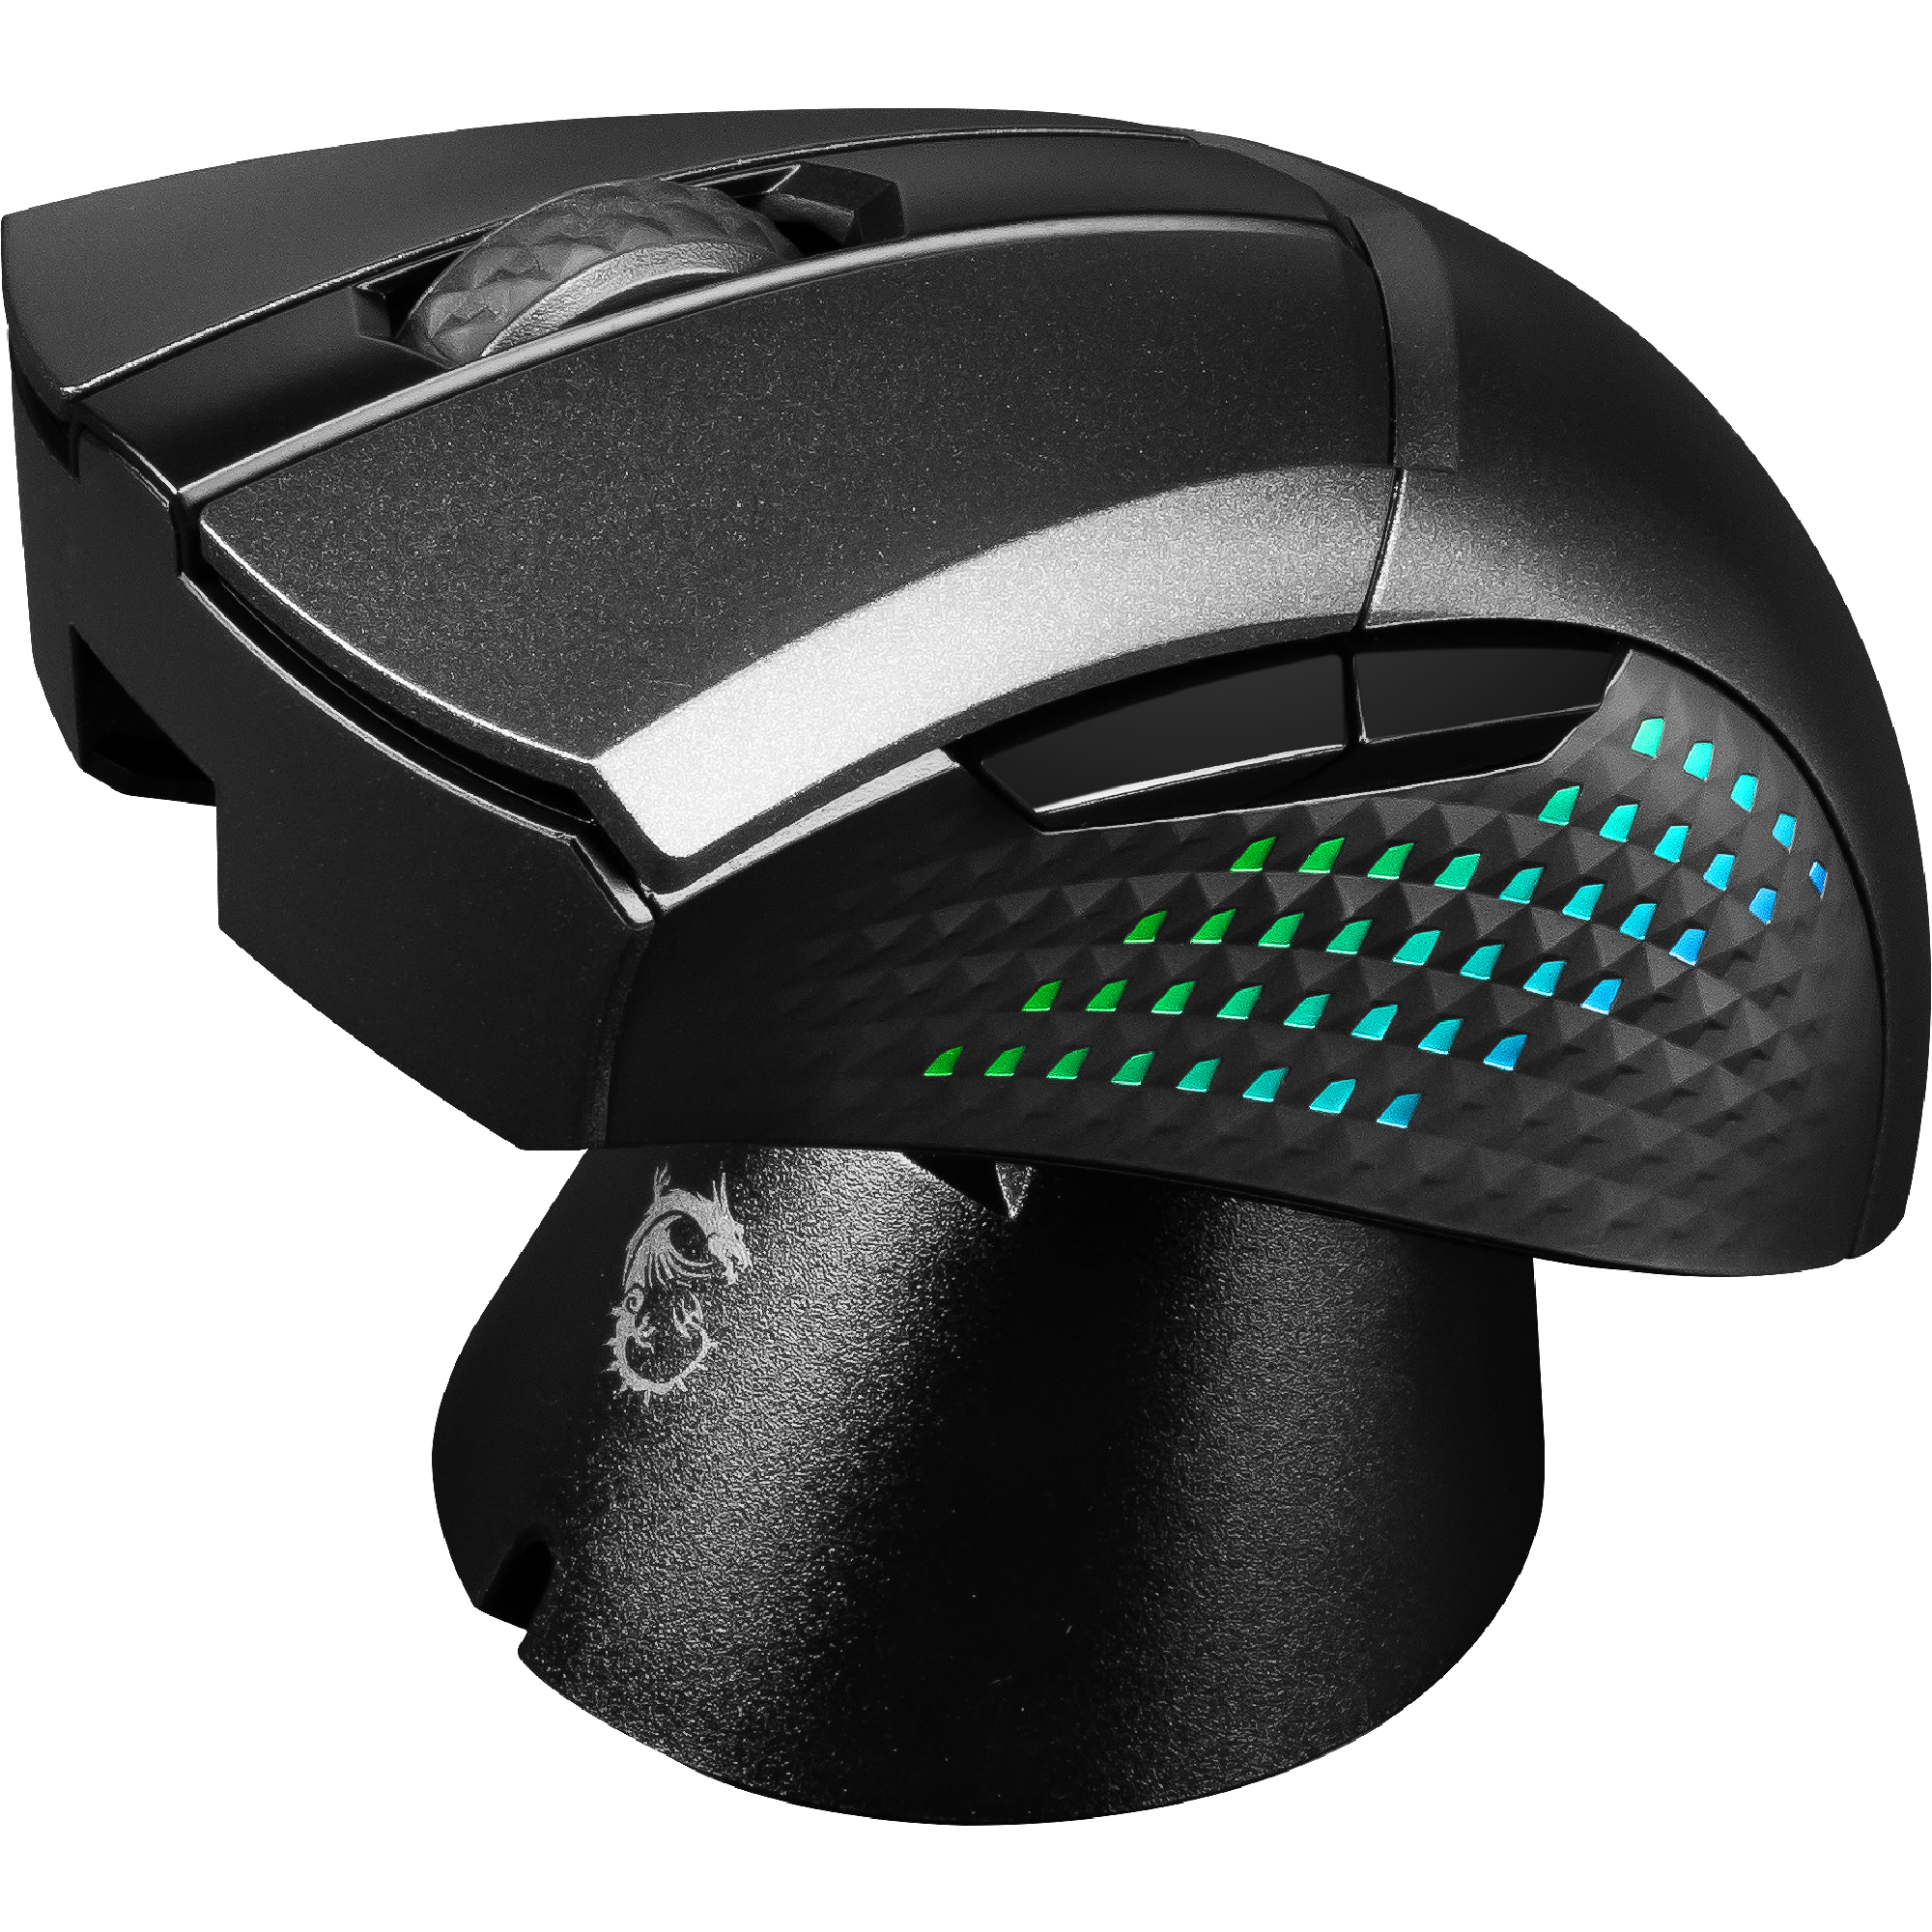 MSI Clutch GM51 lightweight wireless gaming mouse.